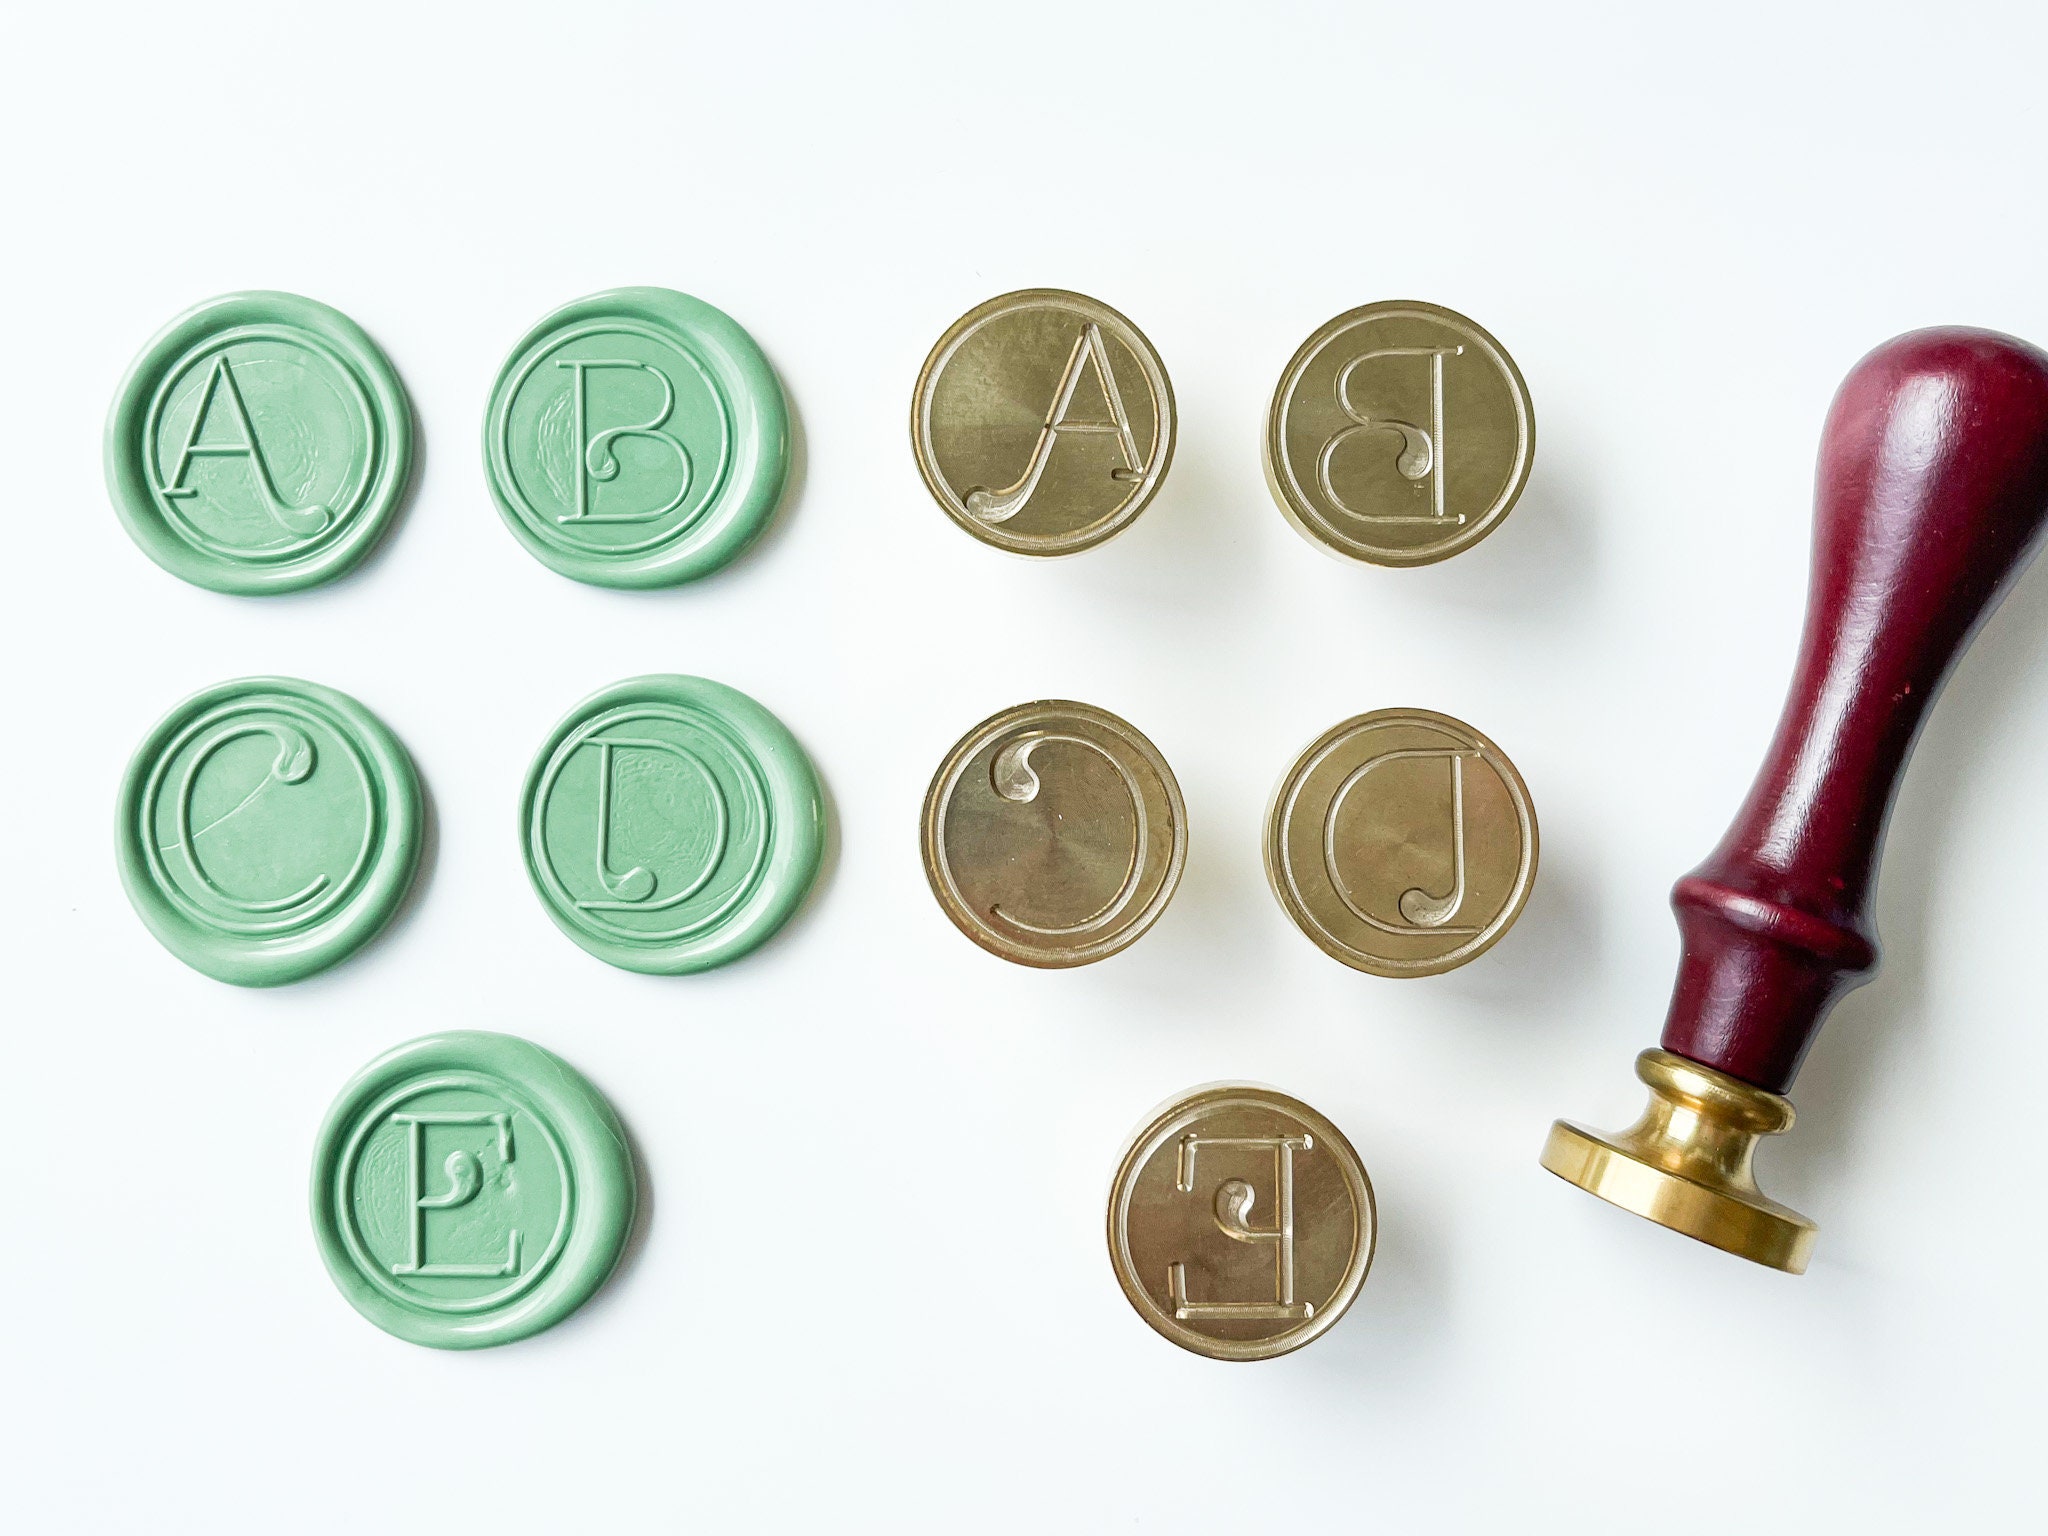 Beebeecraft CRASPIRE Wax Seal Stamp Heads 26 Letters A-Z Alphabet Initial  Brass Head Sealing Stamp with 2PCS Wooden Handle, Wax Letter Seal Stamp for